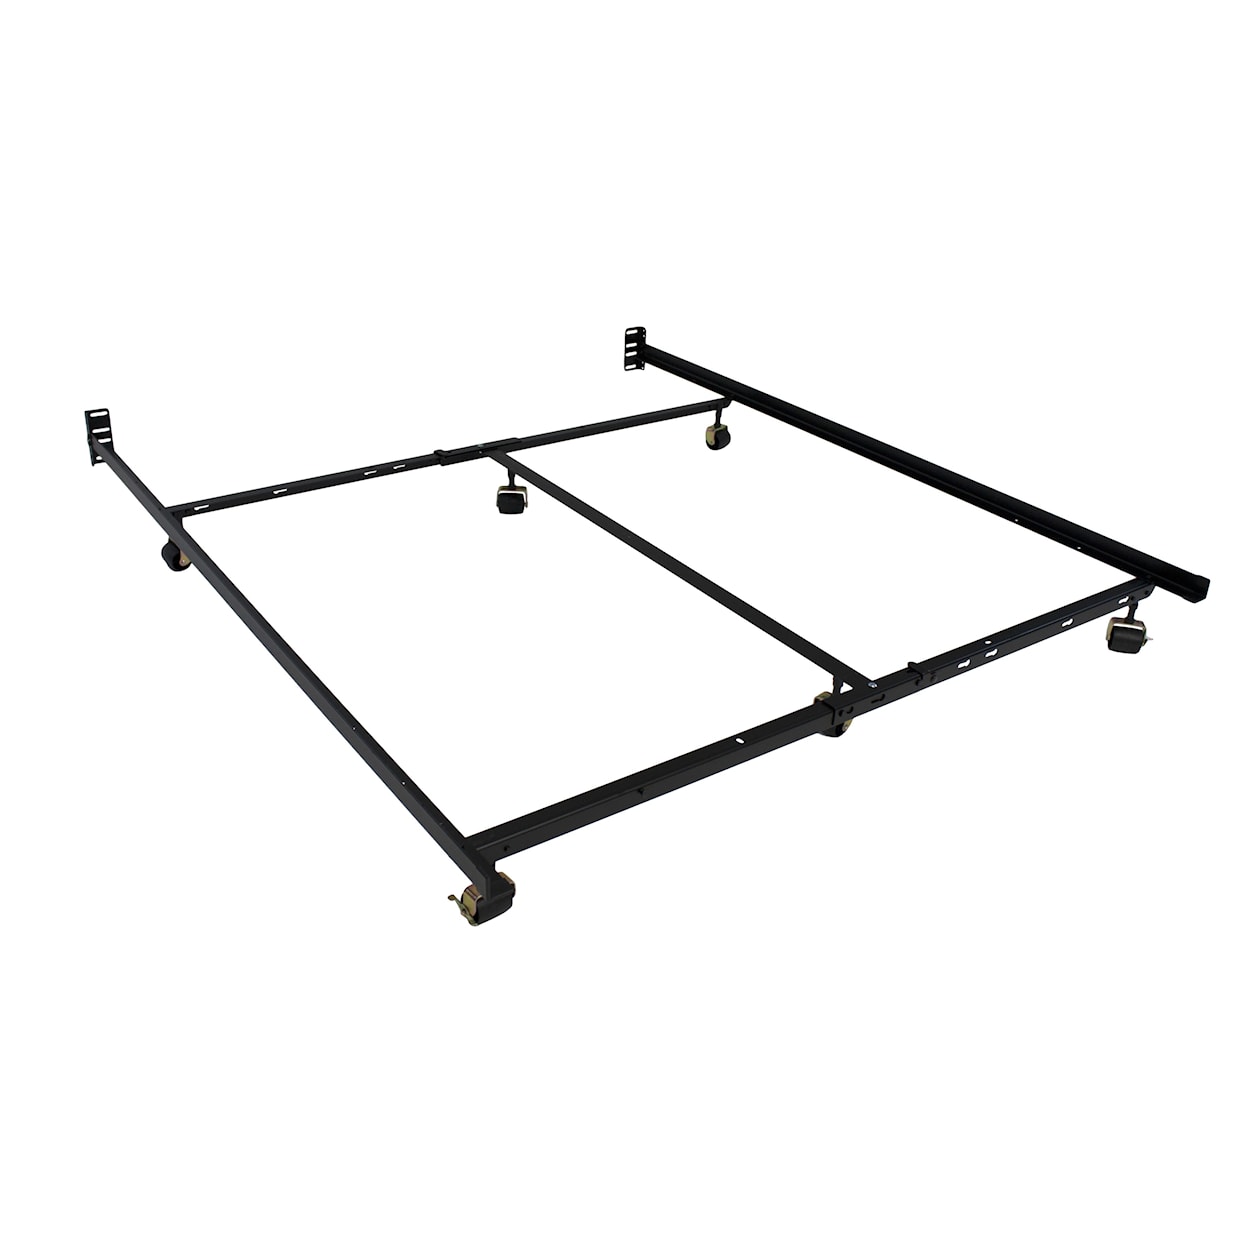 Hollywood Bed Frame Company Multi-Fit Low Profile Bed Frame